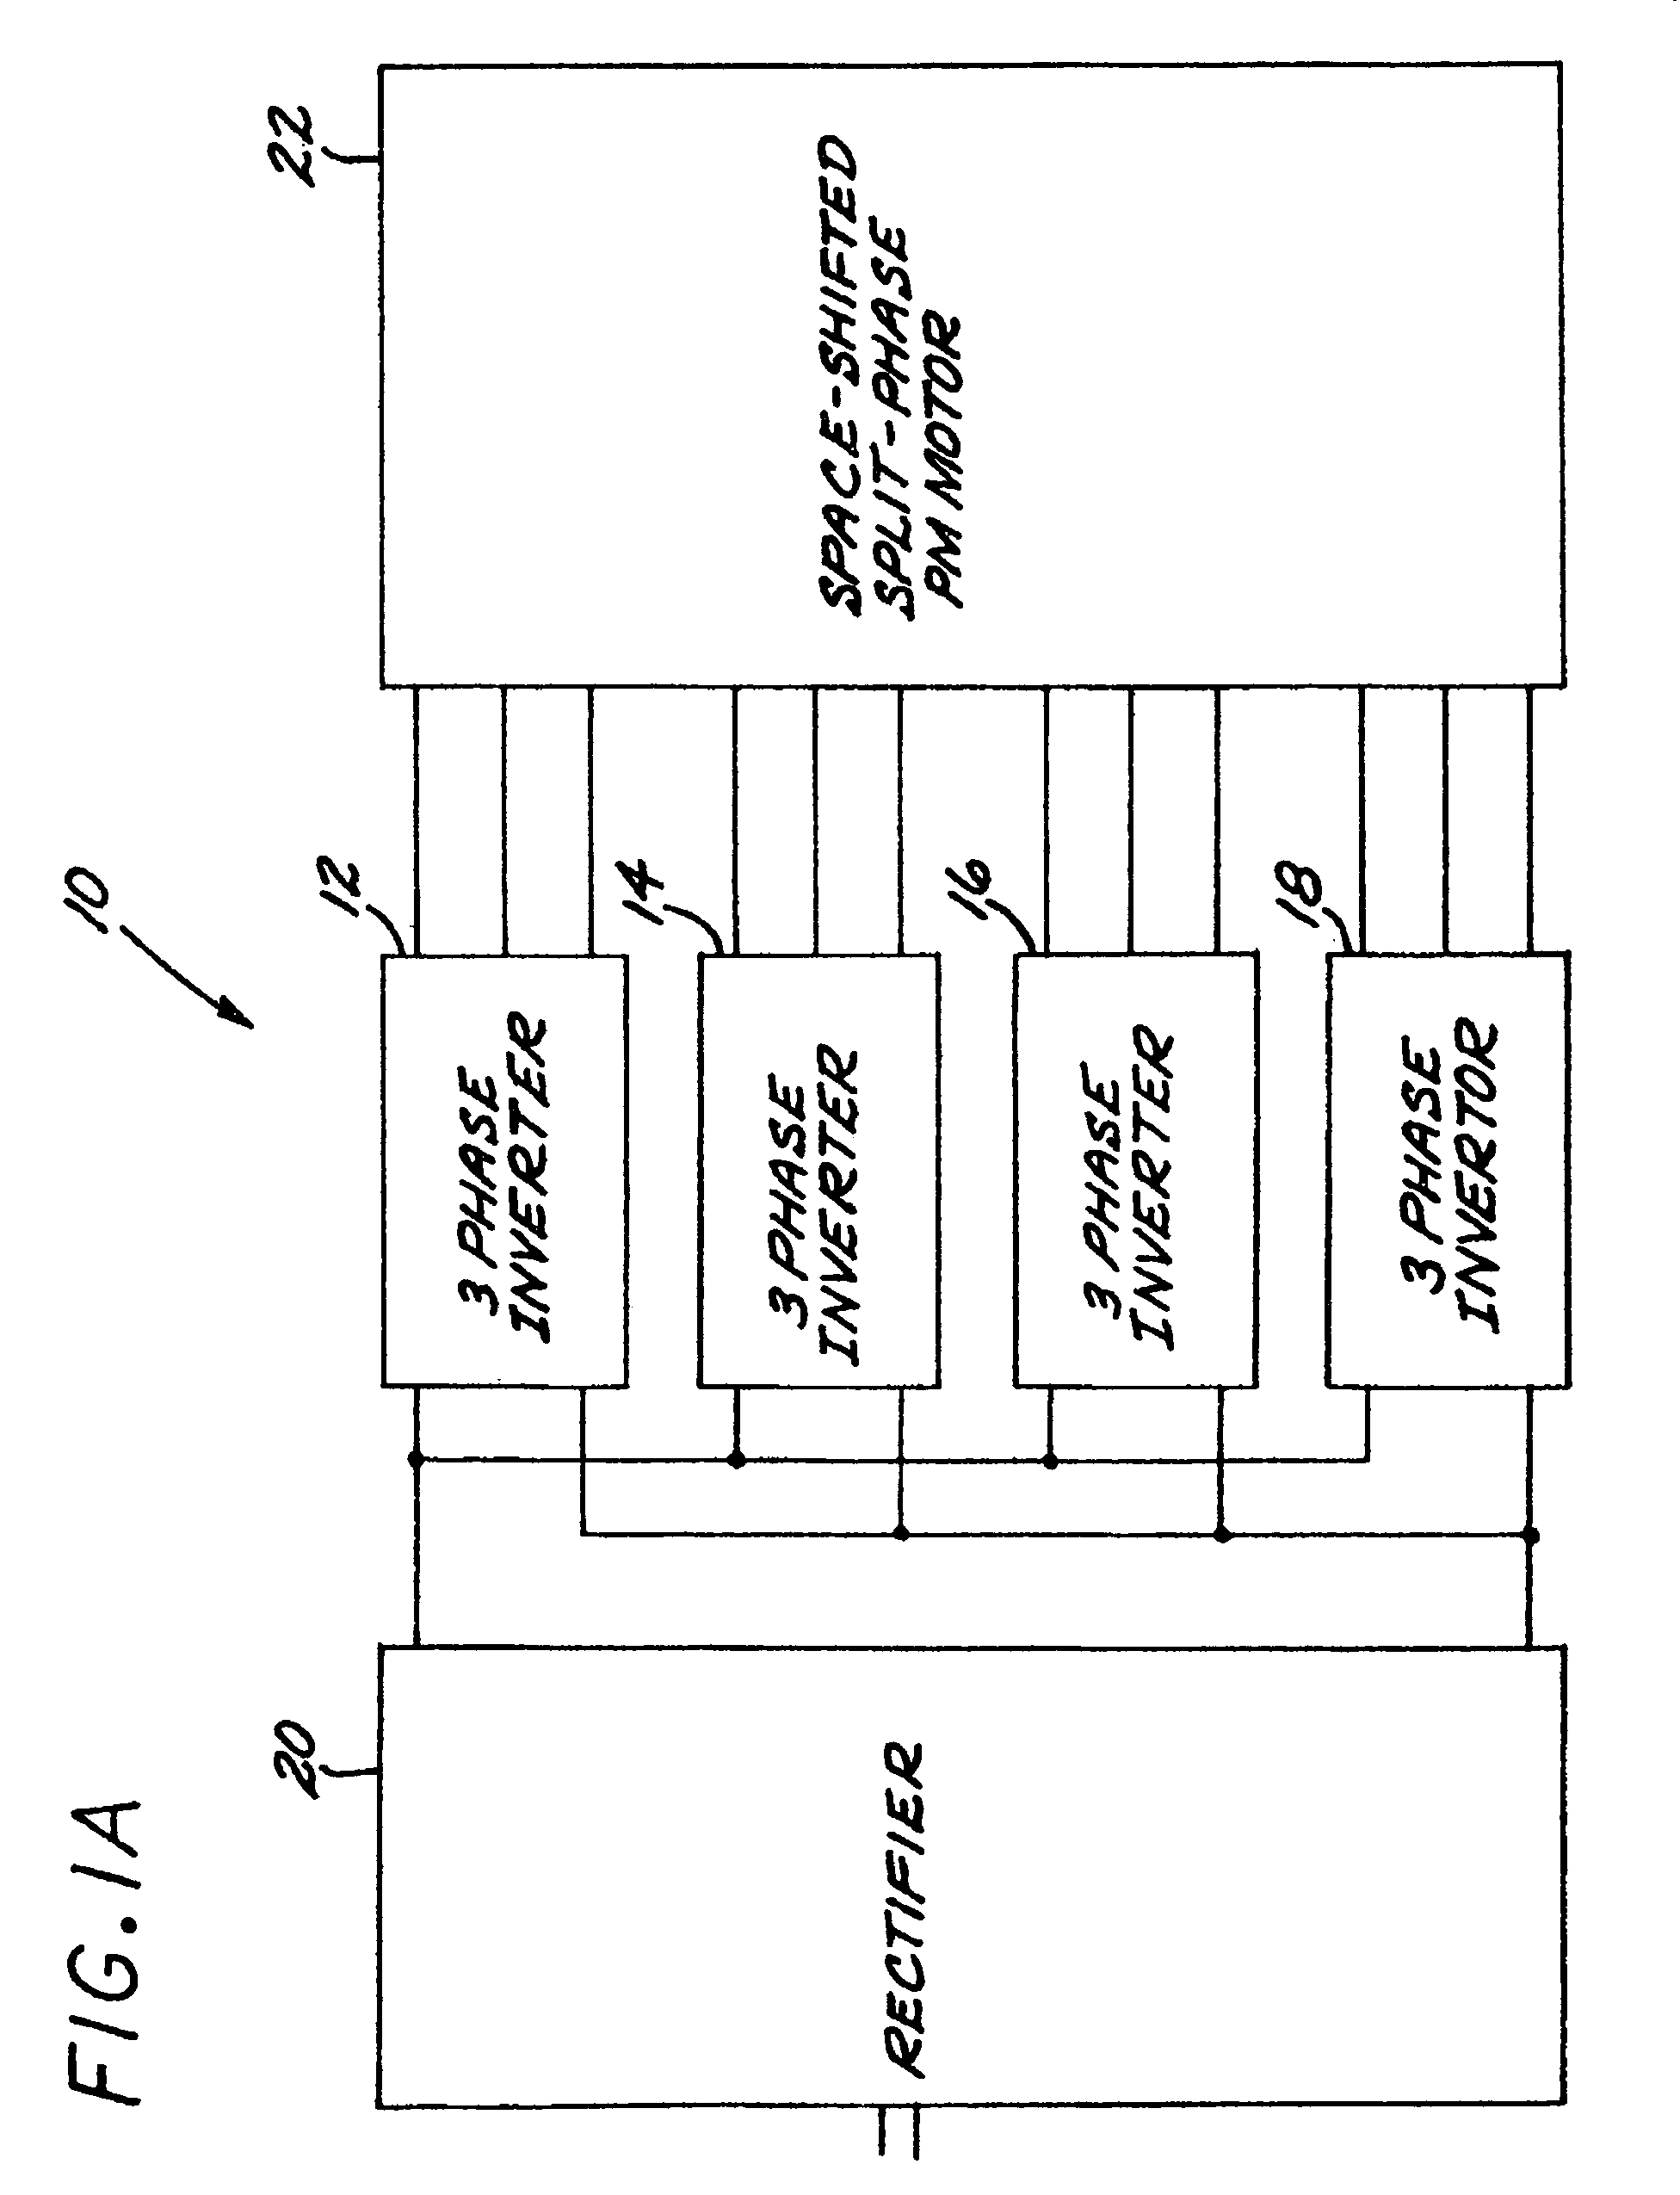 Electric drive system with redundancy